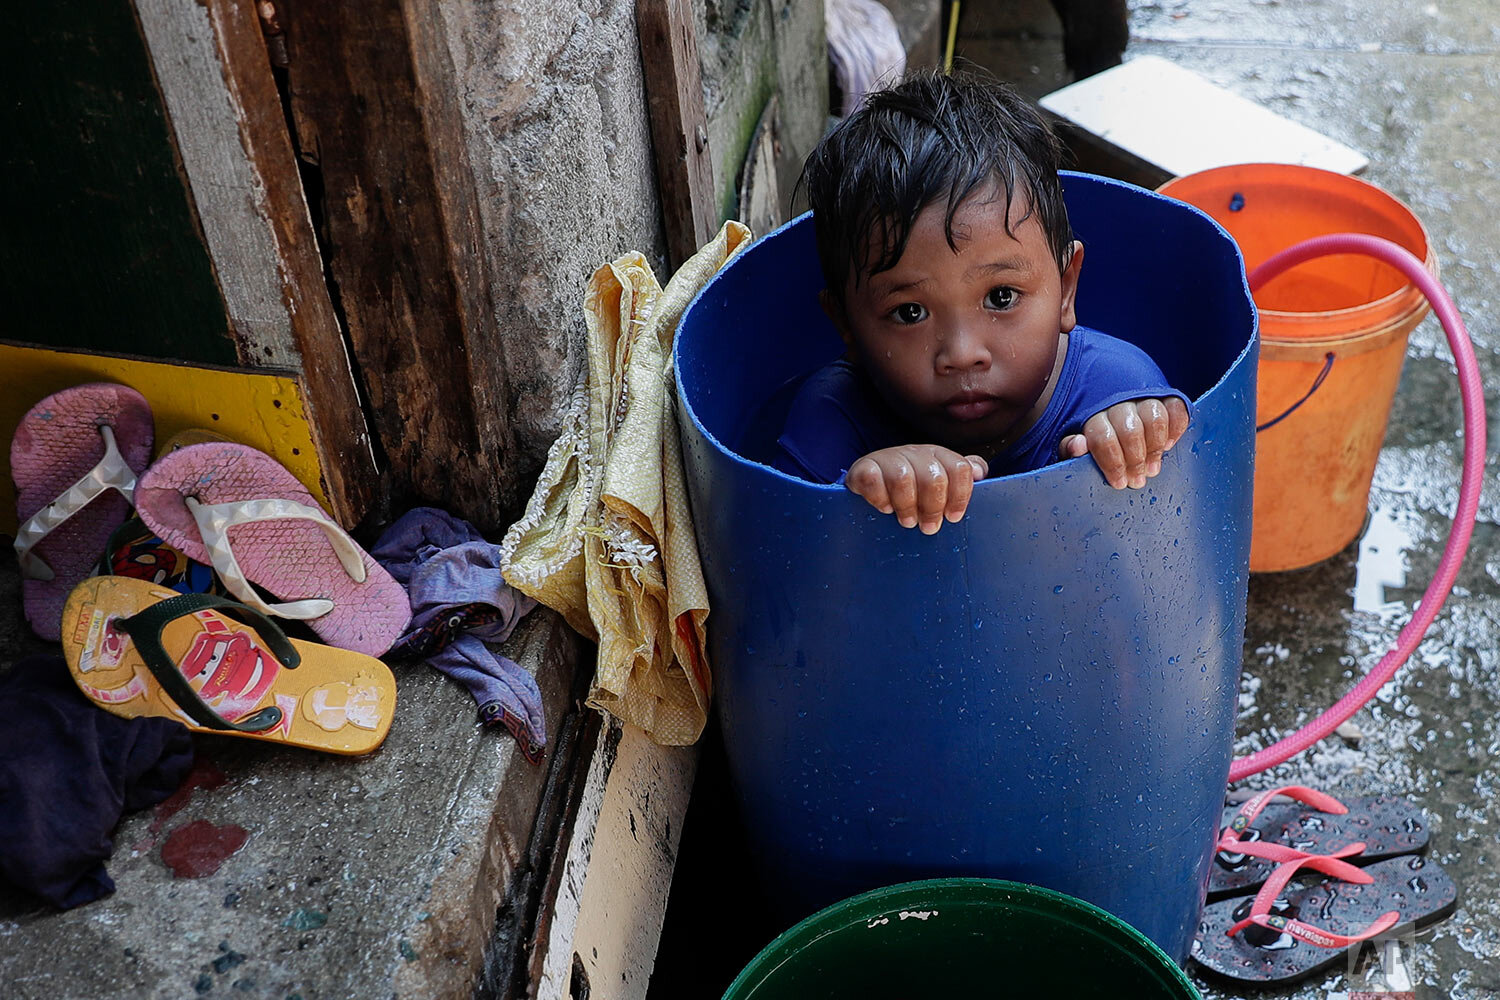  A boy takes a bath inside a plastic container at a coastal village in Cavite province, south of Manila, Philippines, during a continuing enhanced community quarantine to prevent the spread of the new coronavirus, Thursday, May 7, 2020. (AP Photo/Aar